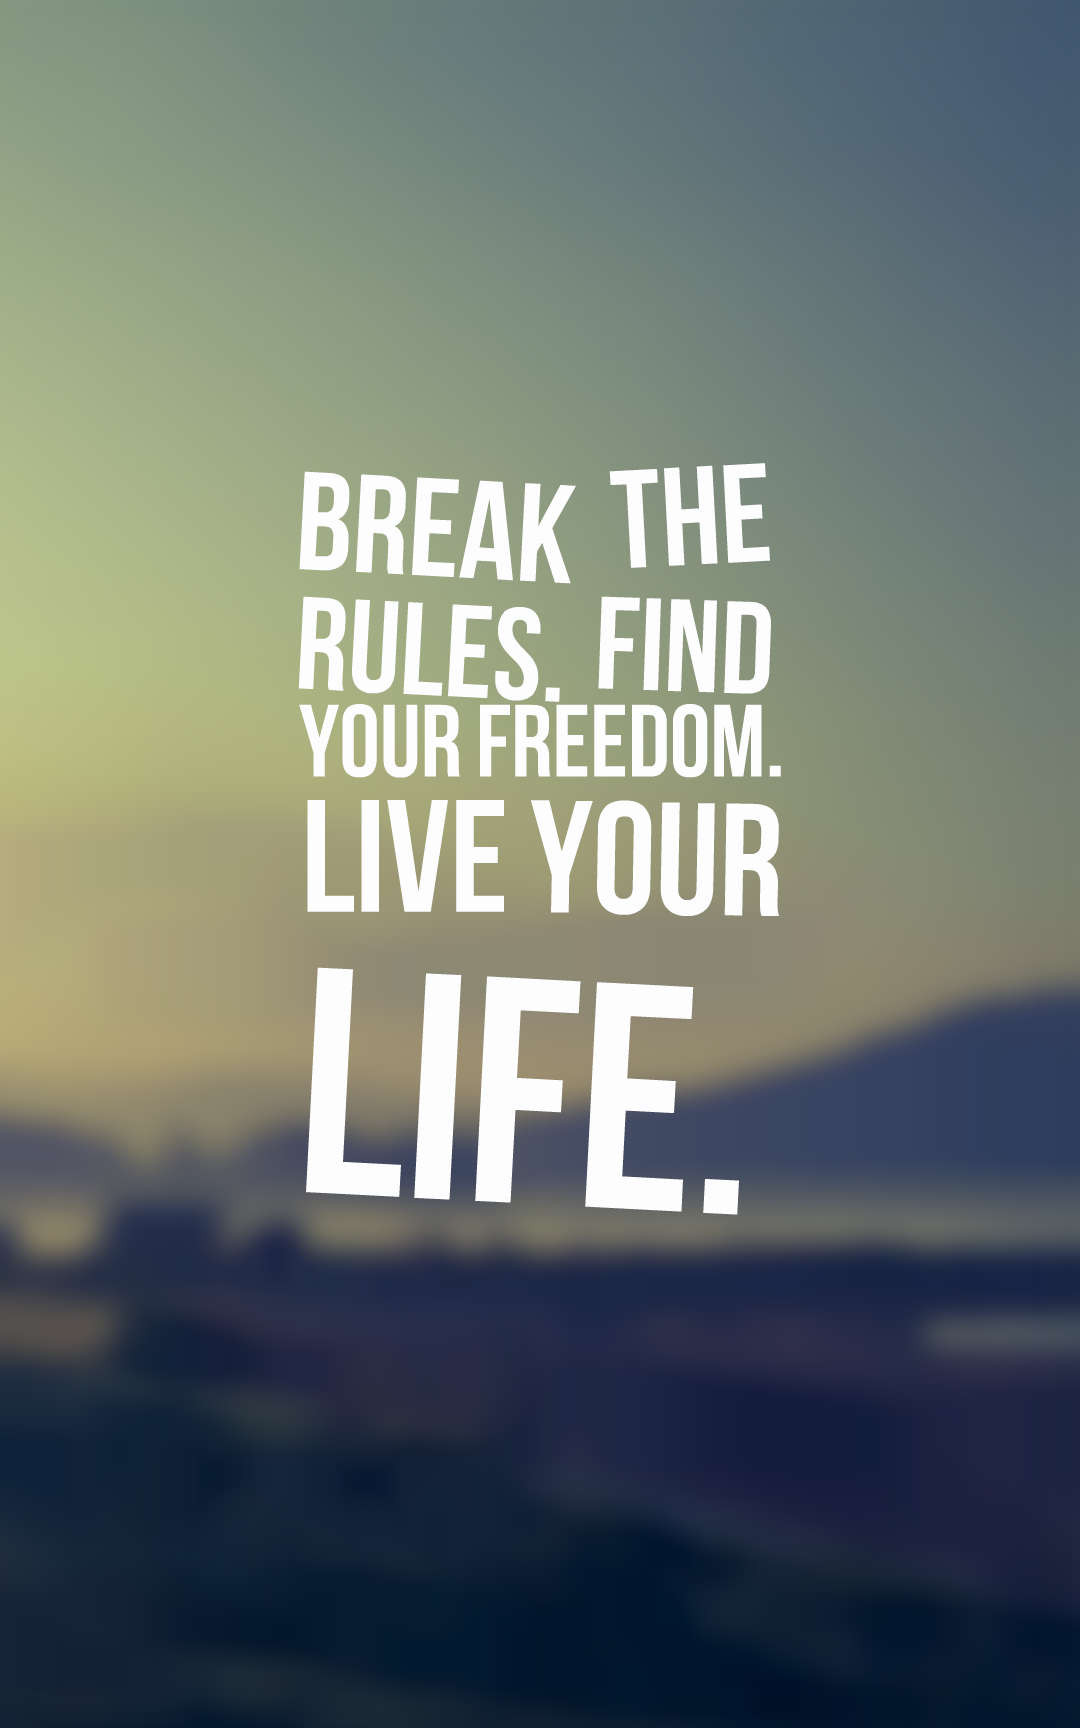 Quotes About Live Your Life
 60 Inspirational Quotes About Live Your Life